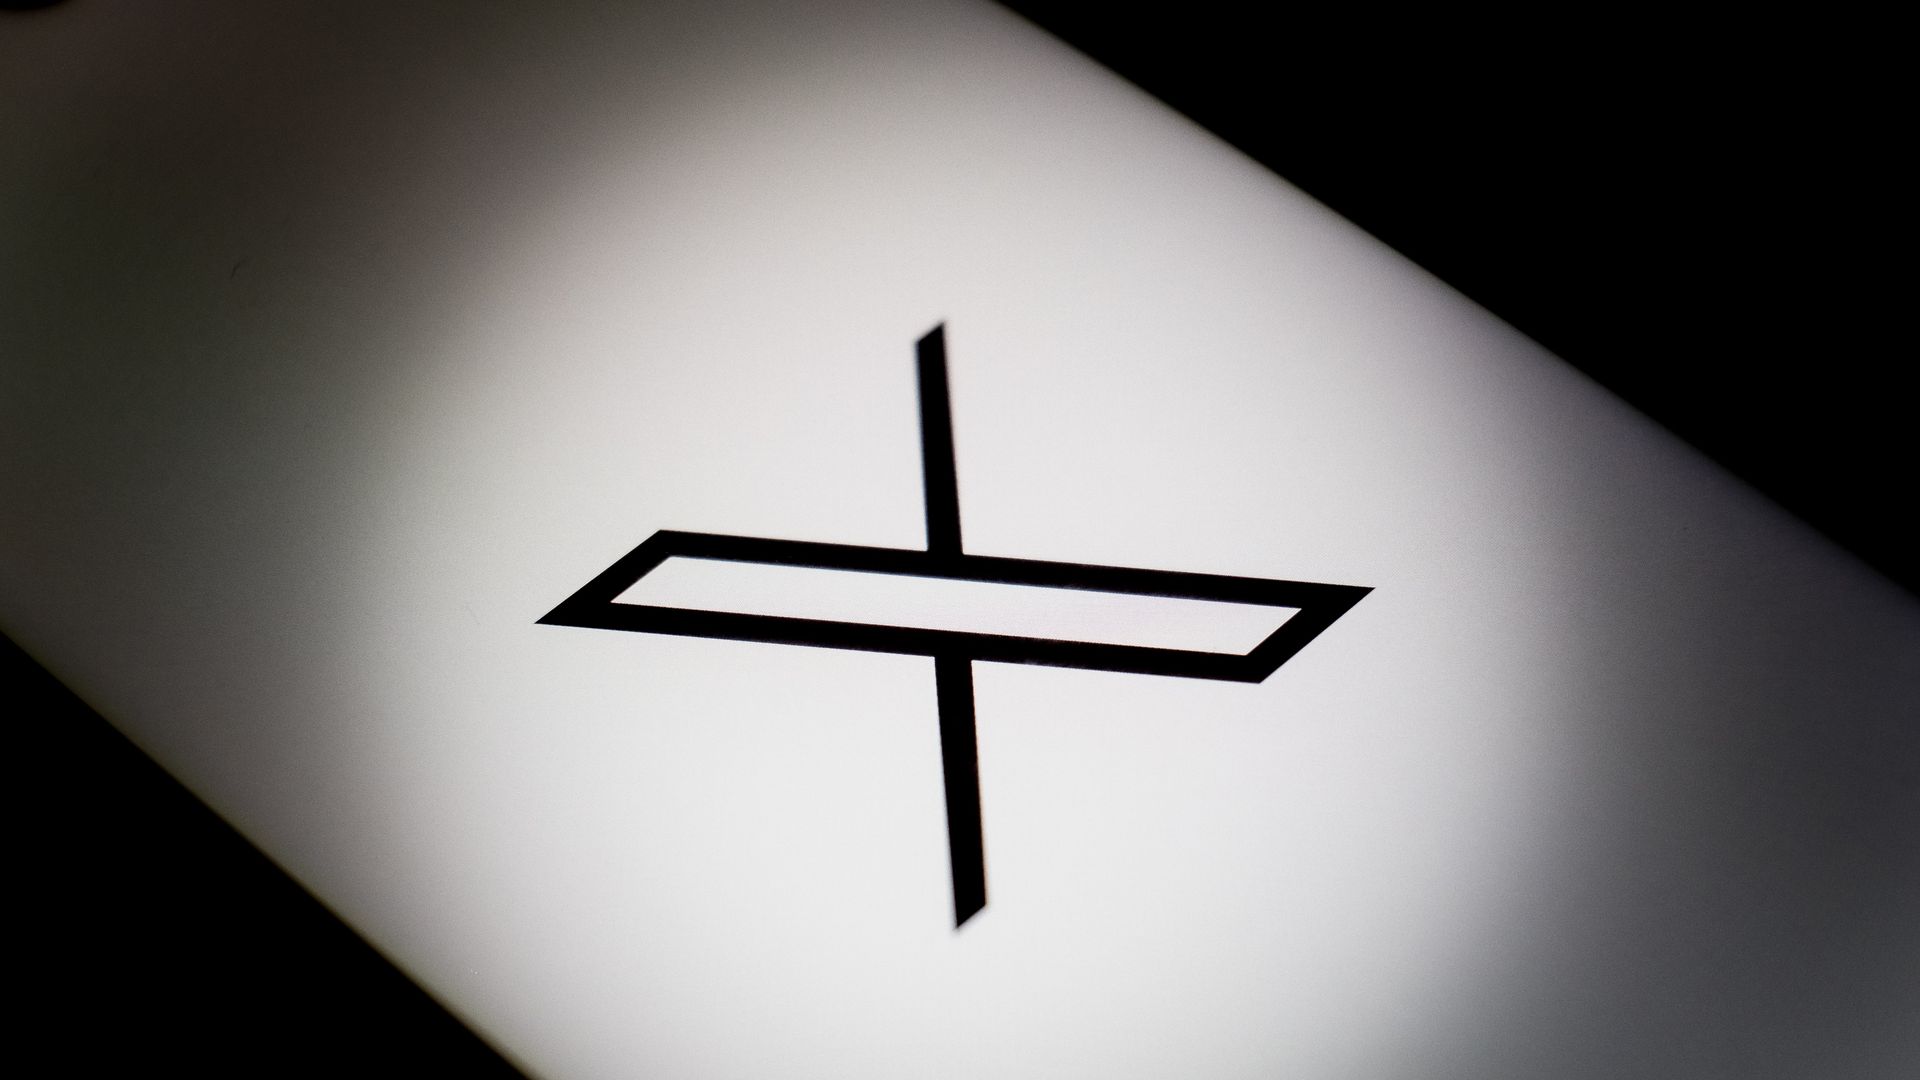 The X logo is being displayed on a smartphone screen 